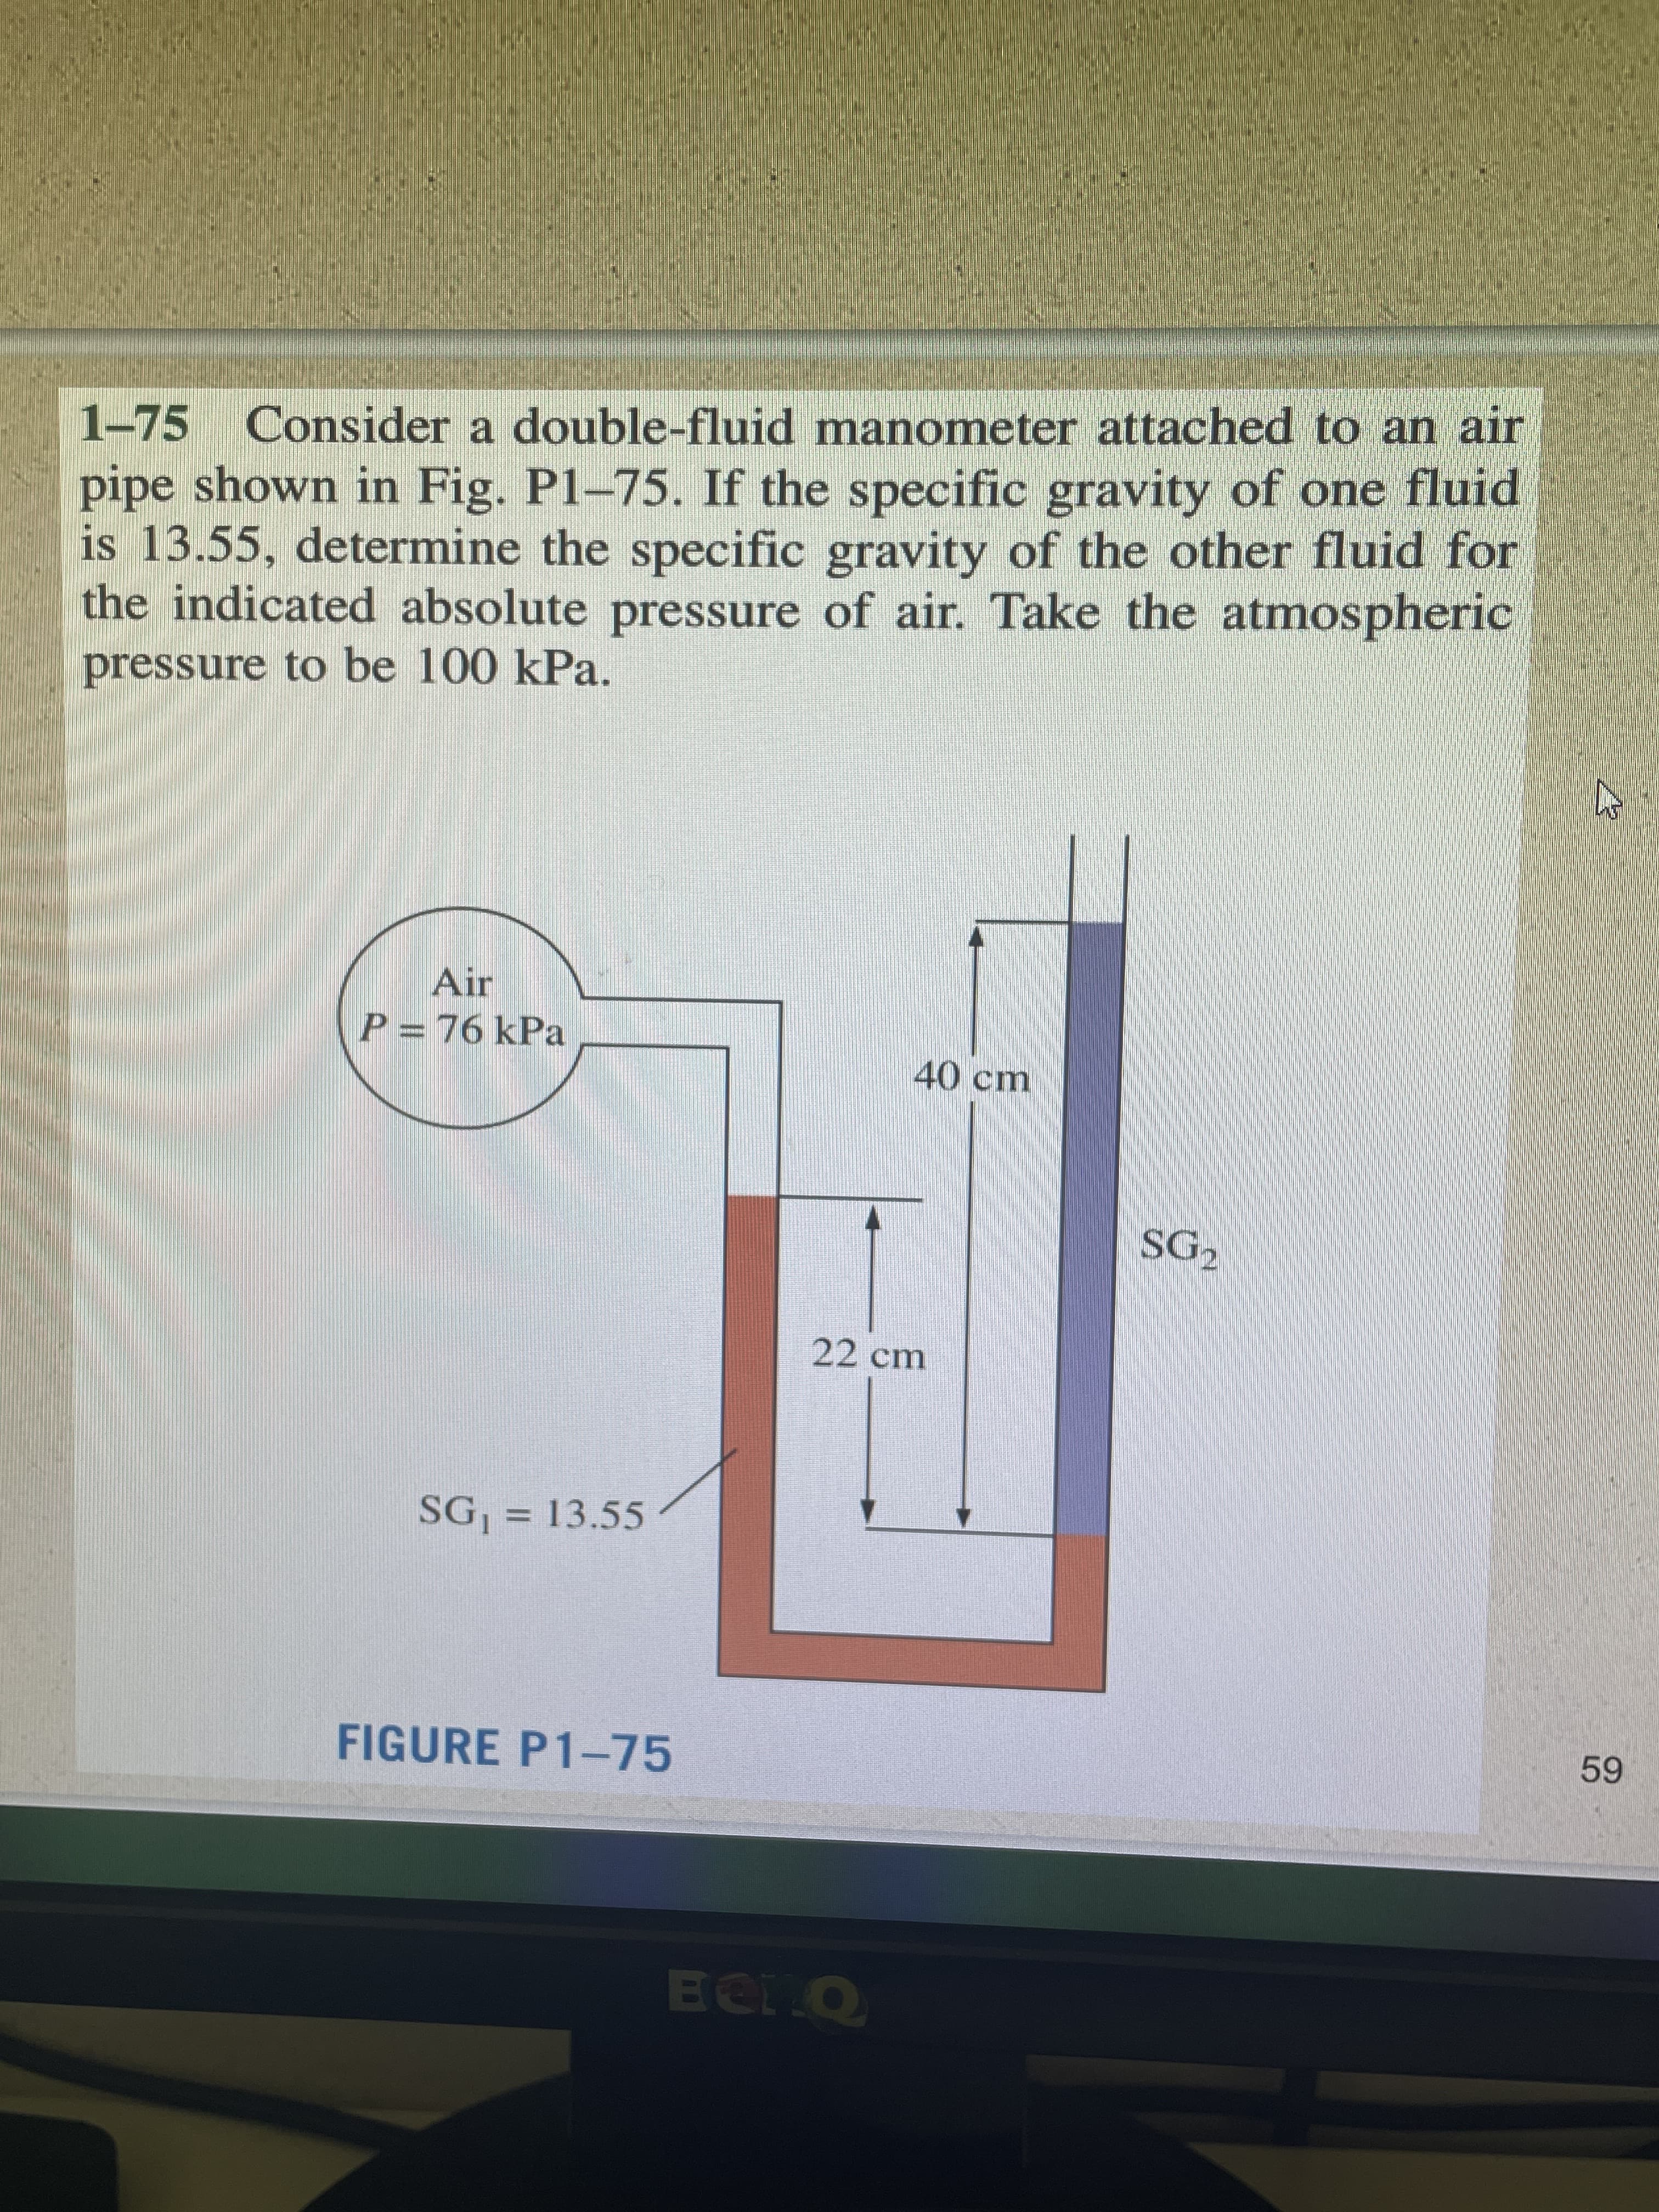 1–75 Consider a double-fluid manometer attached to an air
pipe shown in Fig. P1-75. If the specific gravity of one fluid
is 13.55, determine the specific gravity of the other fluid for
the indicated absolute pressure of air. Take the atmospheric
pressure to be 100 kPa.
